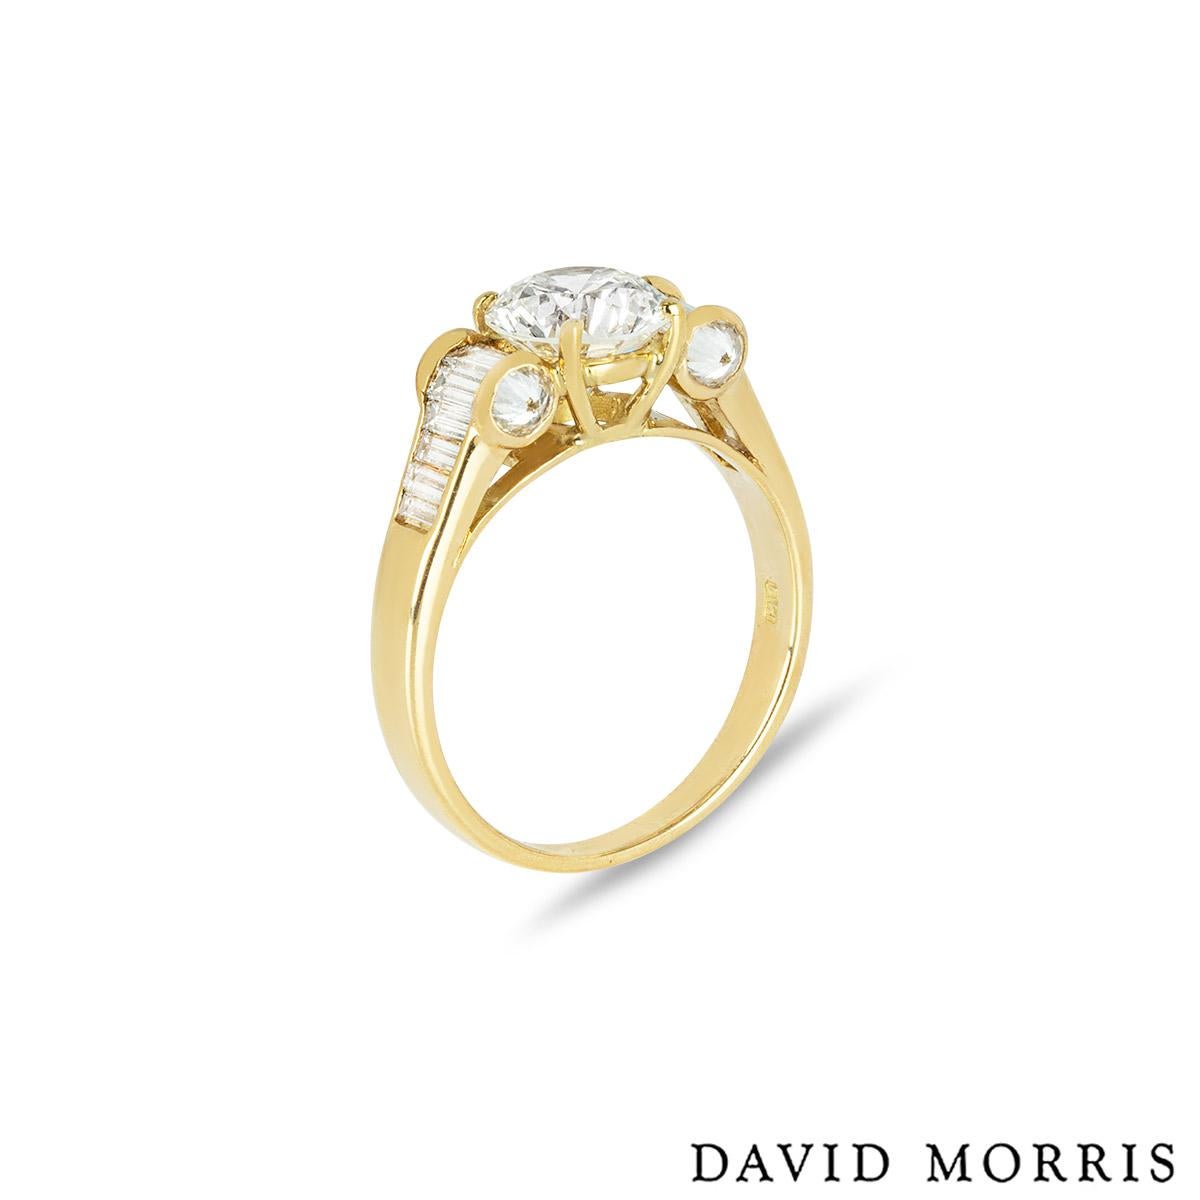 An 18k yellow gold diamond ring by David Morris. The ring features a round brilliant cut diamond in the centre with a weight of 1.40ct, H colour and VS1 clarity. The ring has 7 baguette cut diamonds on either side of the central diamond totalling